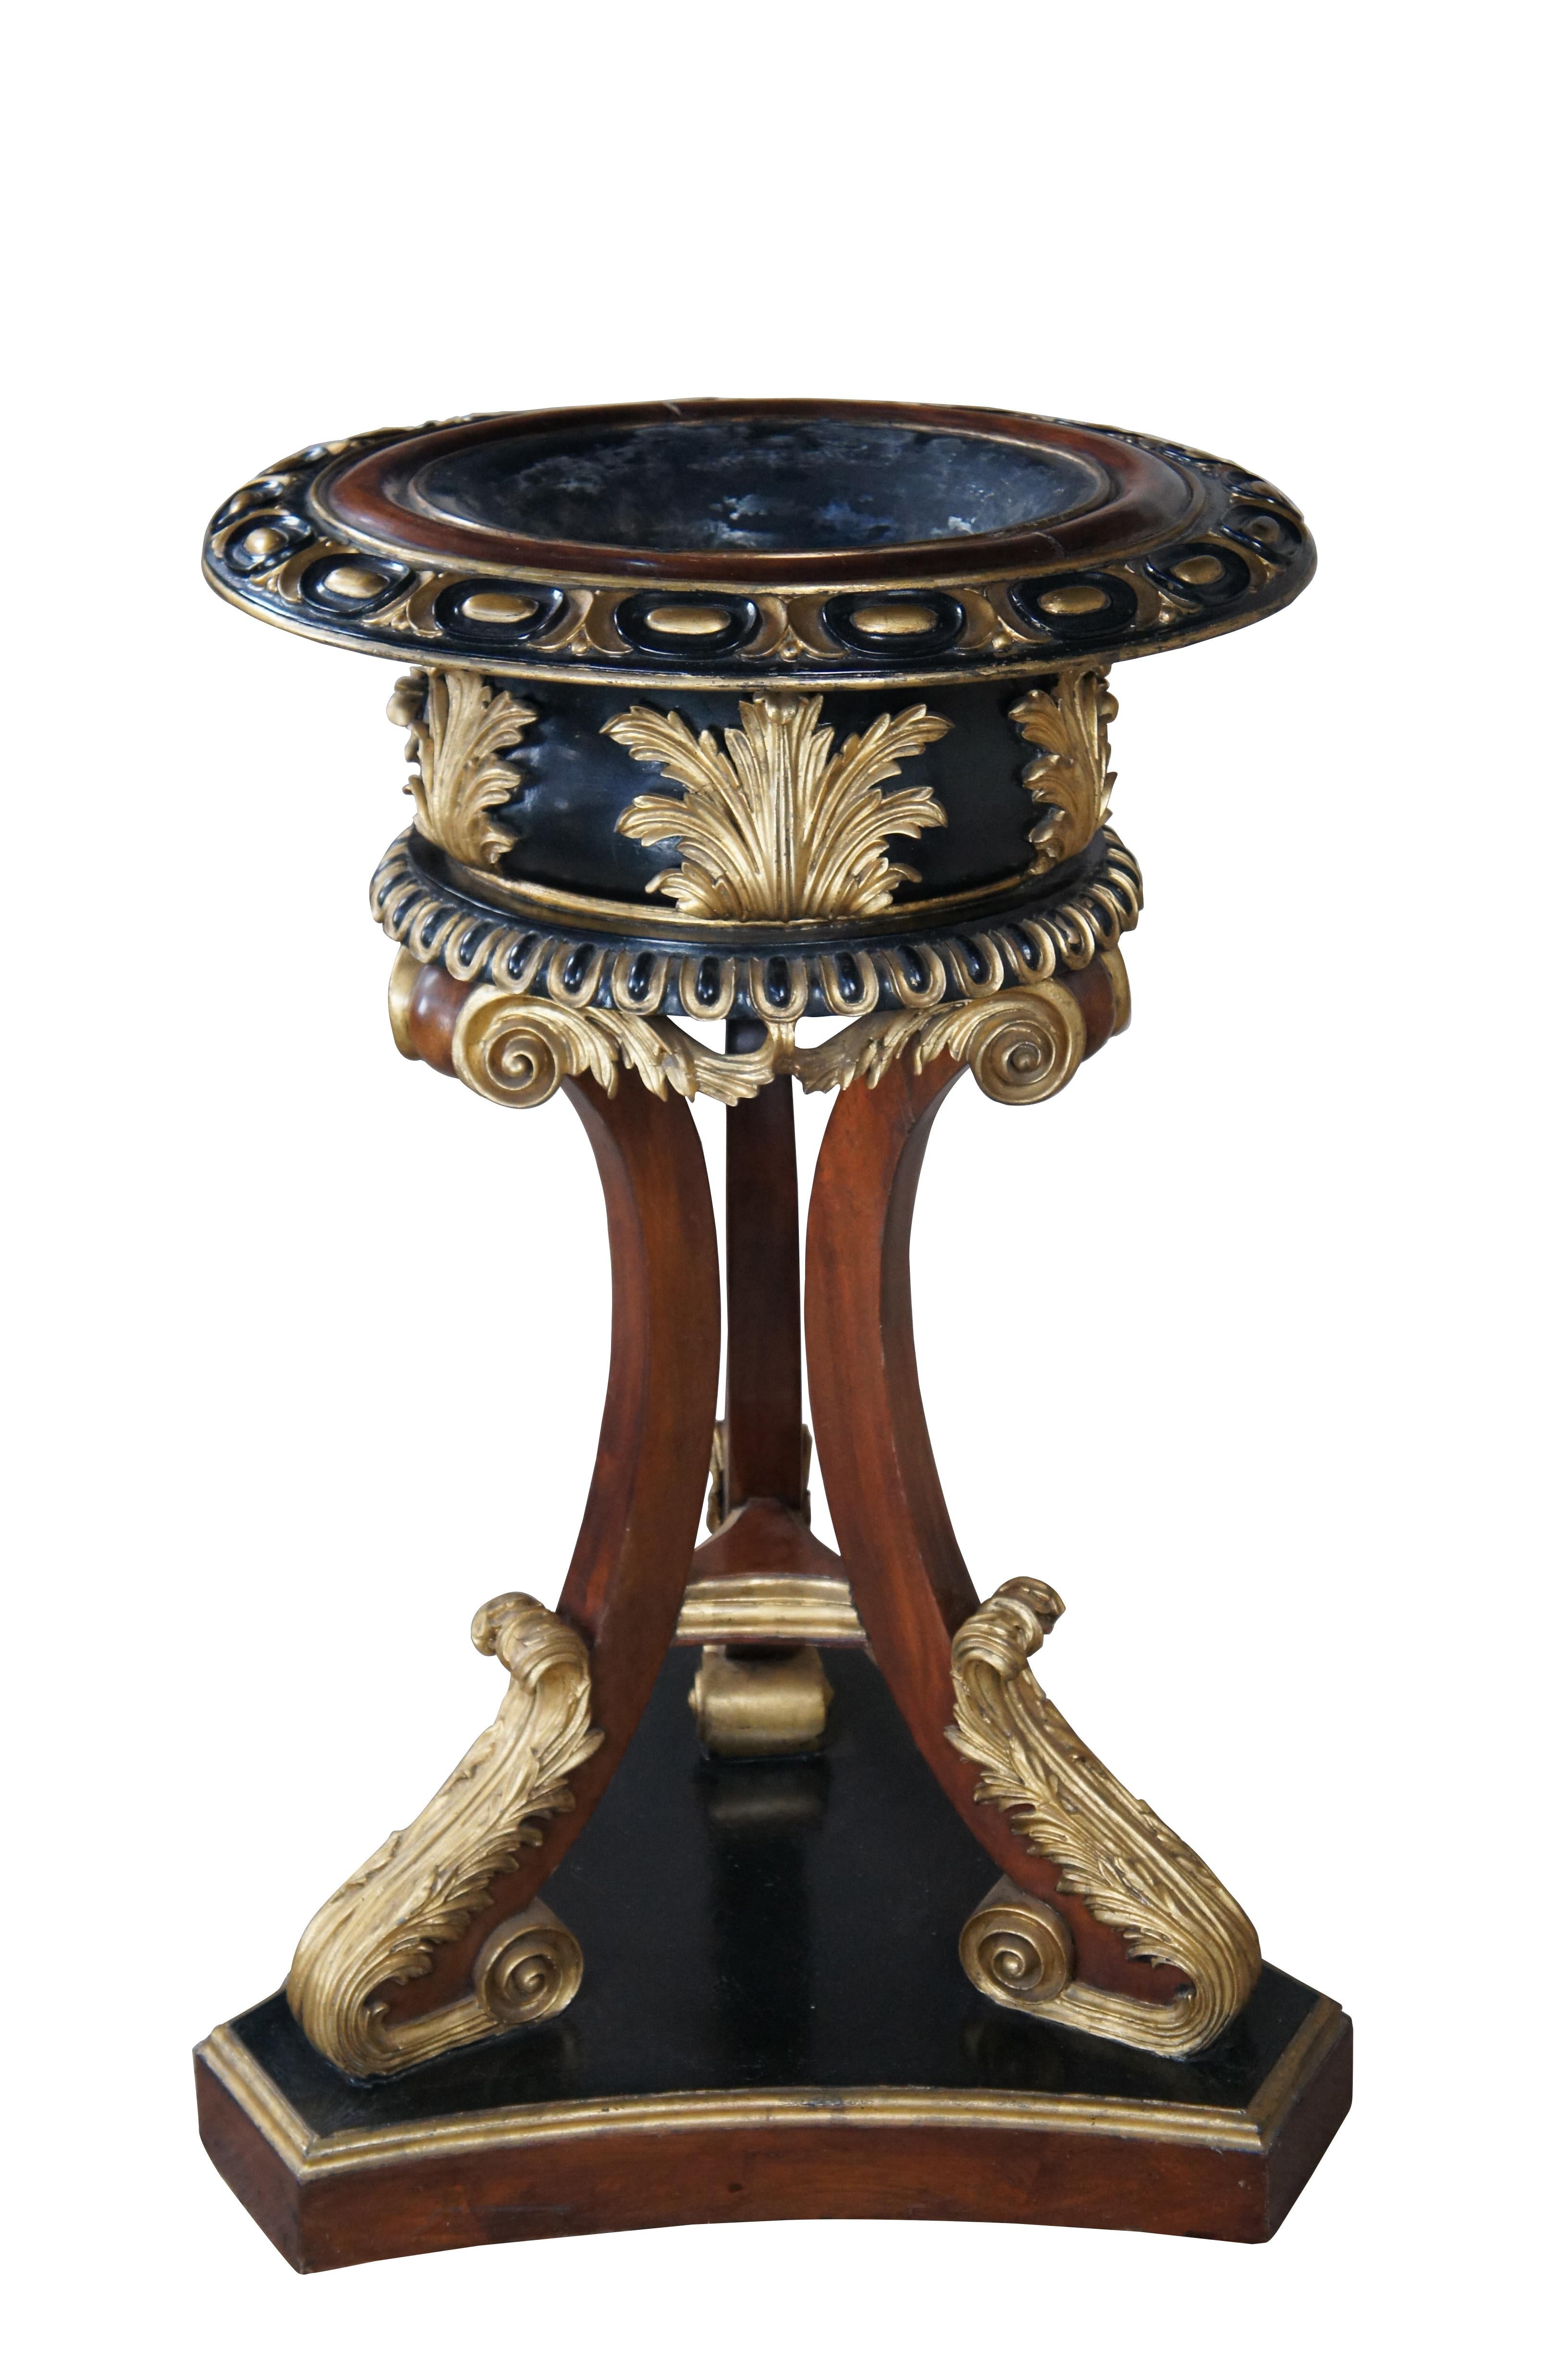 An exquisite Scottish Regency style jardinieres or planter in the manner of William Trotter, circa 19th Century. Constructed from mahogany with a parcel-gilt and ebonized finish. Features a circular basin with a border of cabochons above a shaped